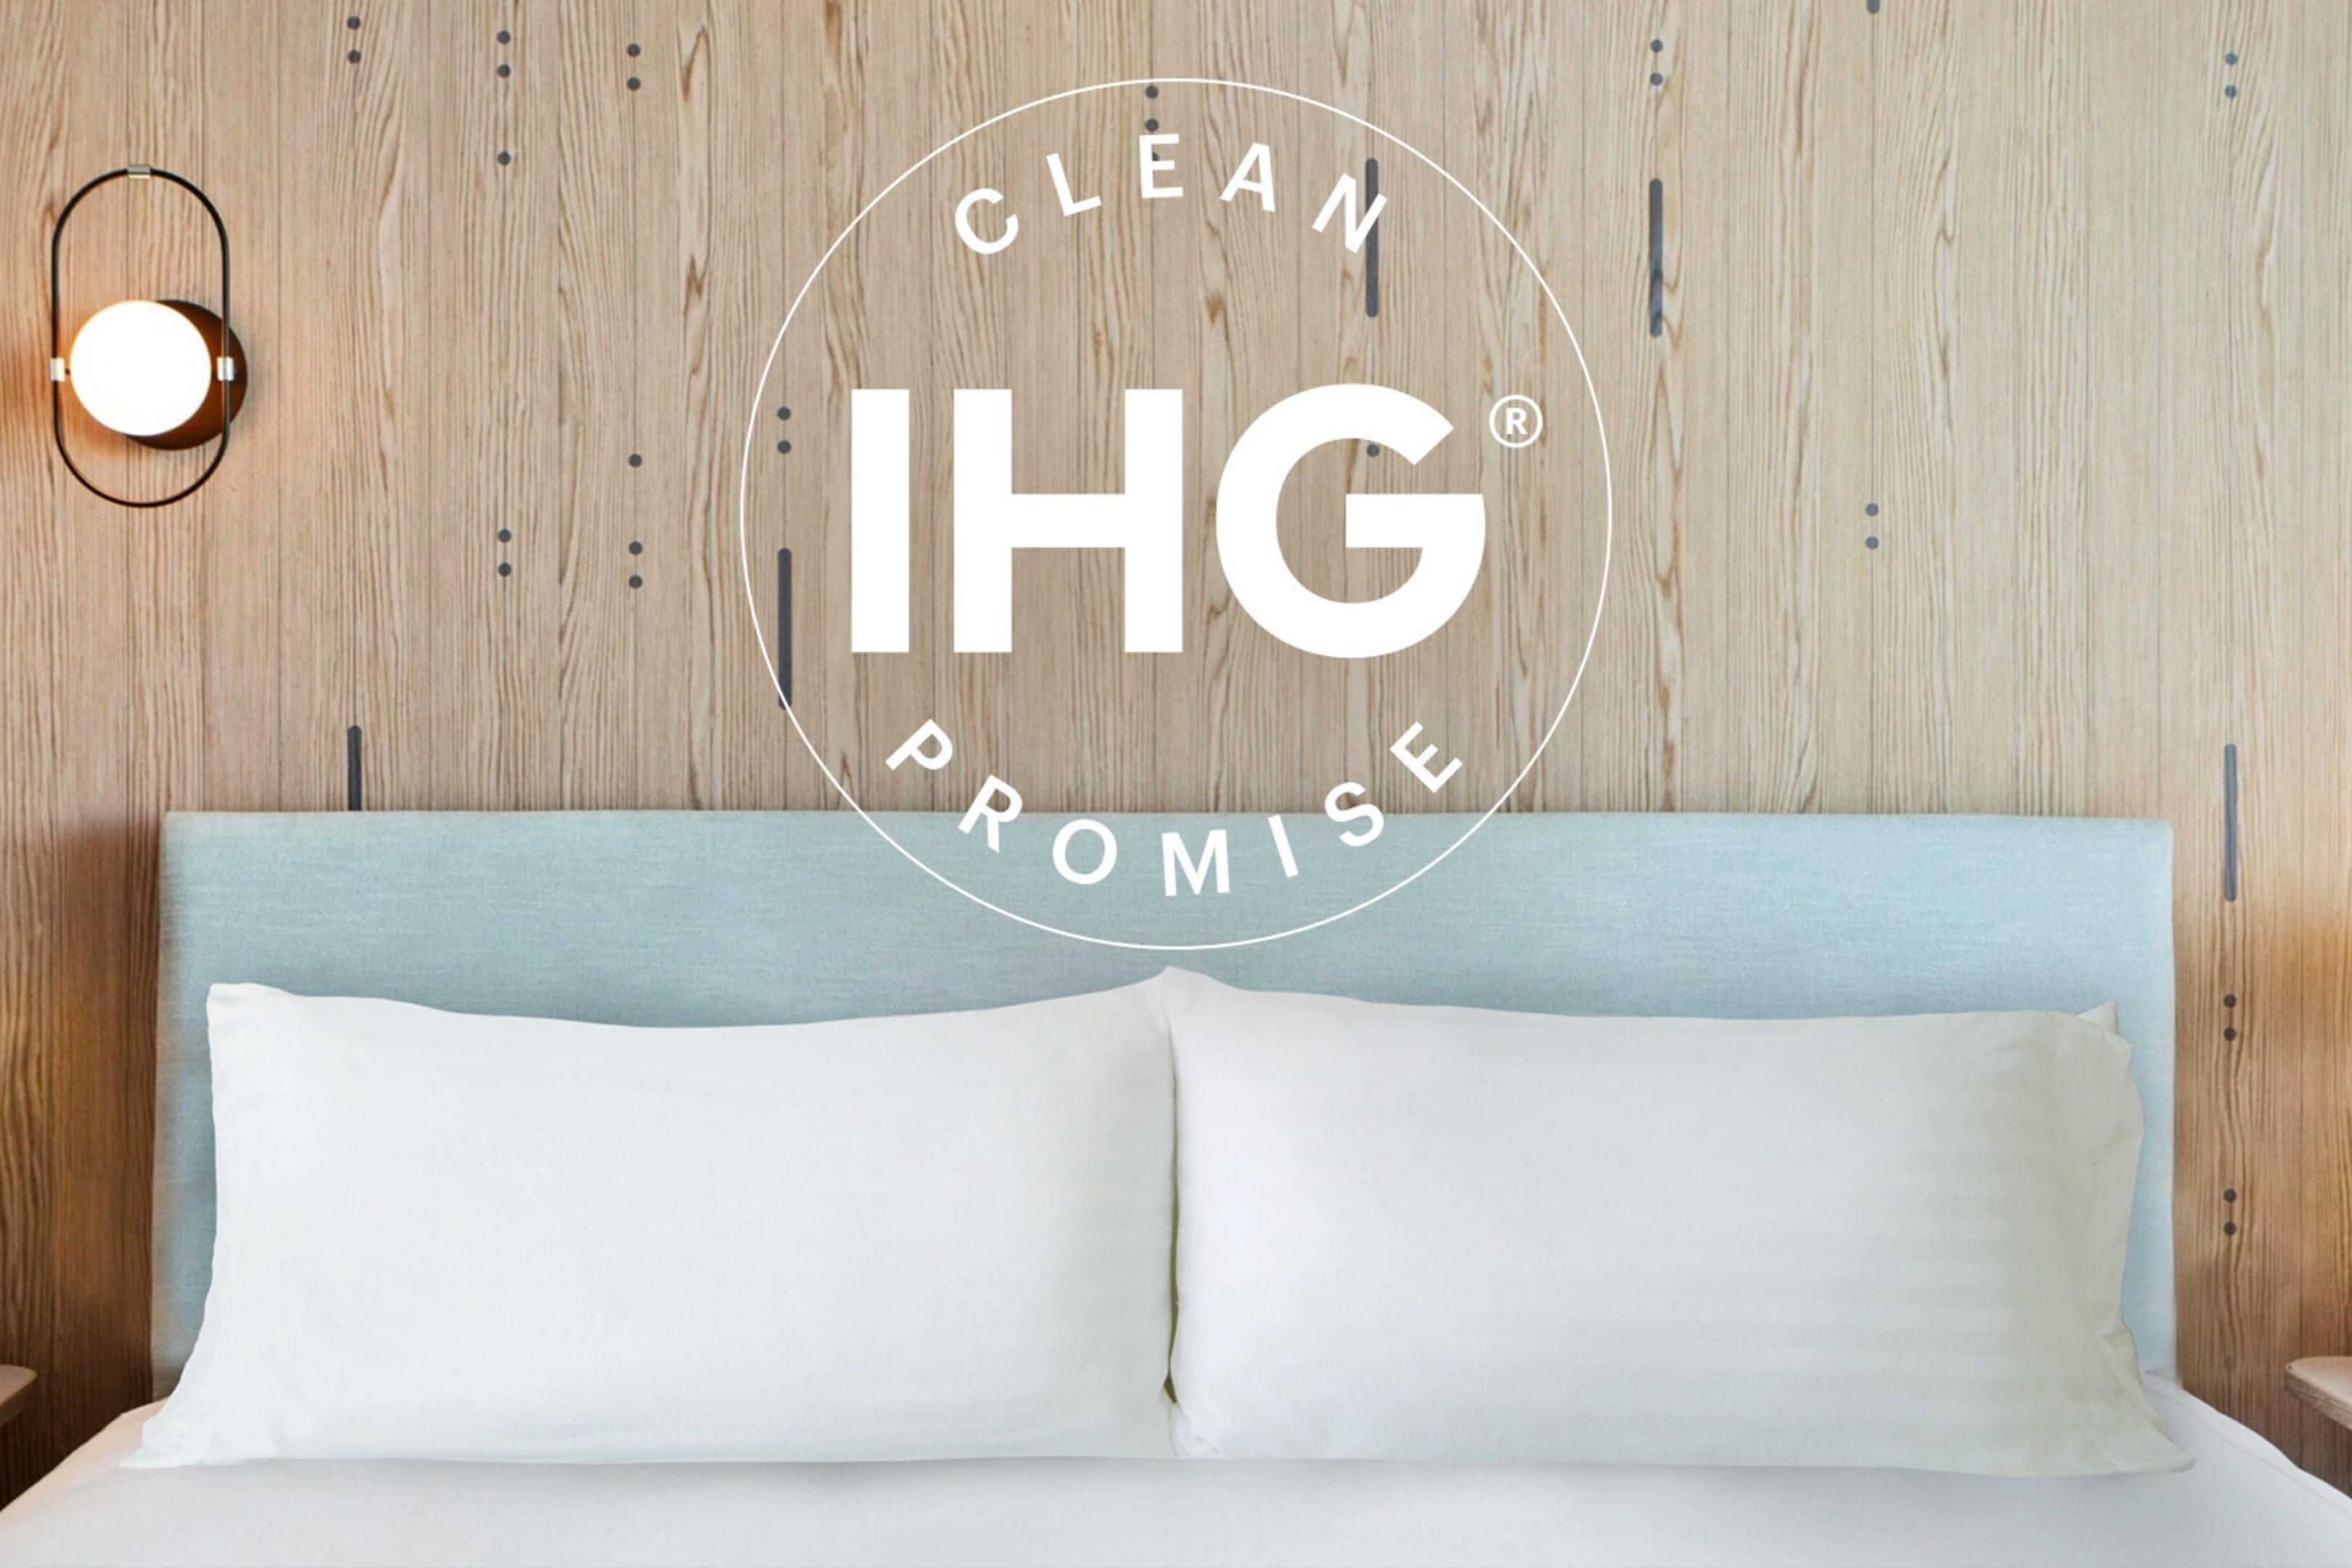 Expect enhanced cleanliness standards when you stay at our Downtown Asheville hotel. To ensure your comfort, our staff has been trained on property cleaning and sanitizing procedures through our proprietary AimClean program, and by other industry-leading cleaning experts, including from Ecolab. Now more than ever, we are ready to take care of you. 